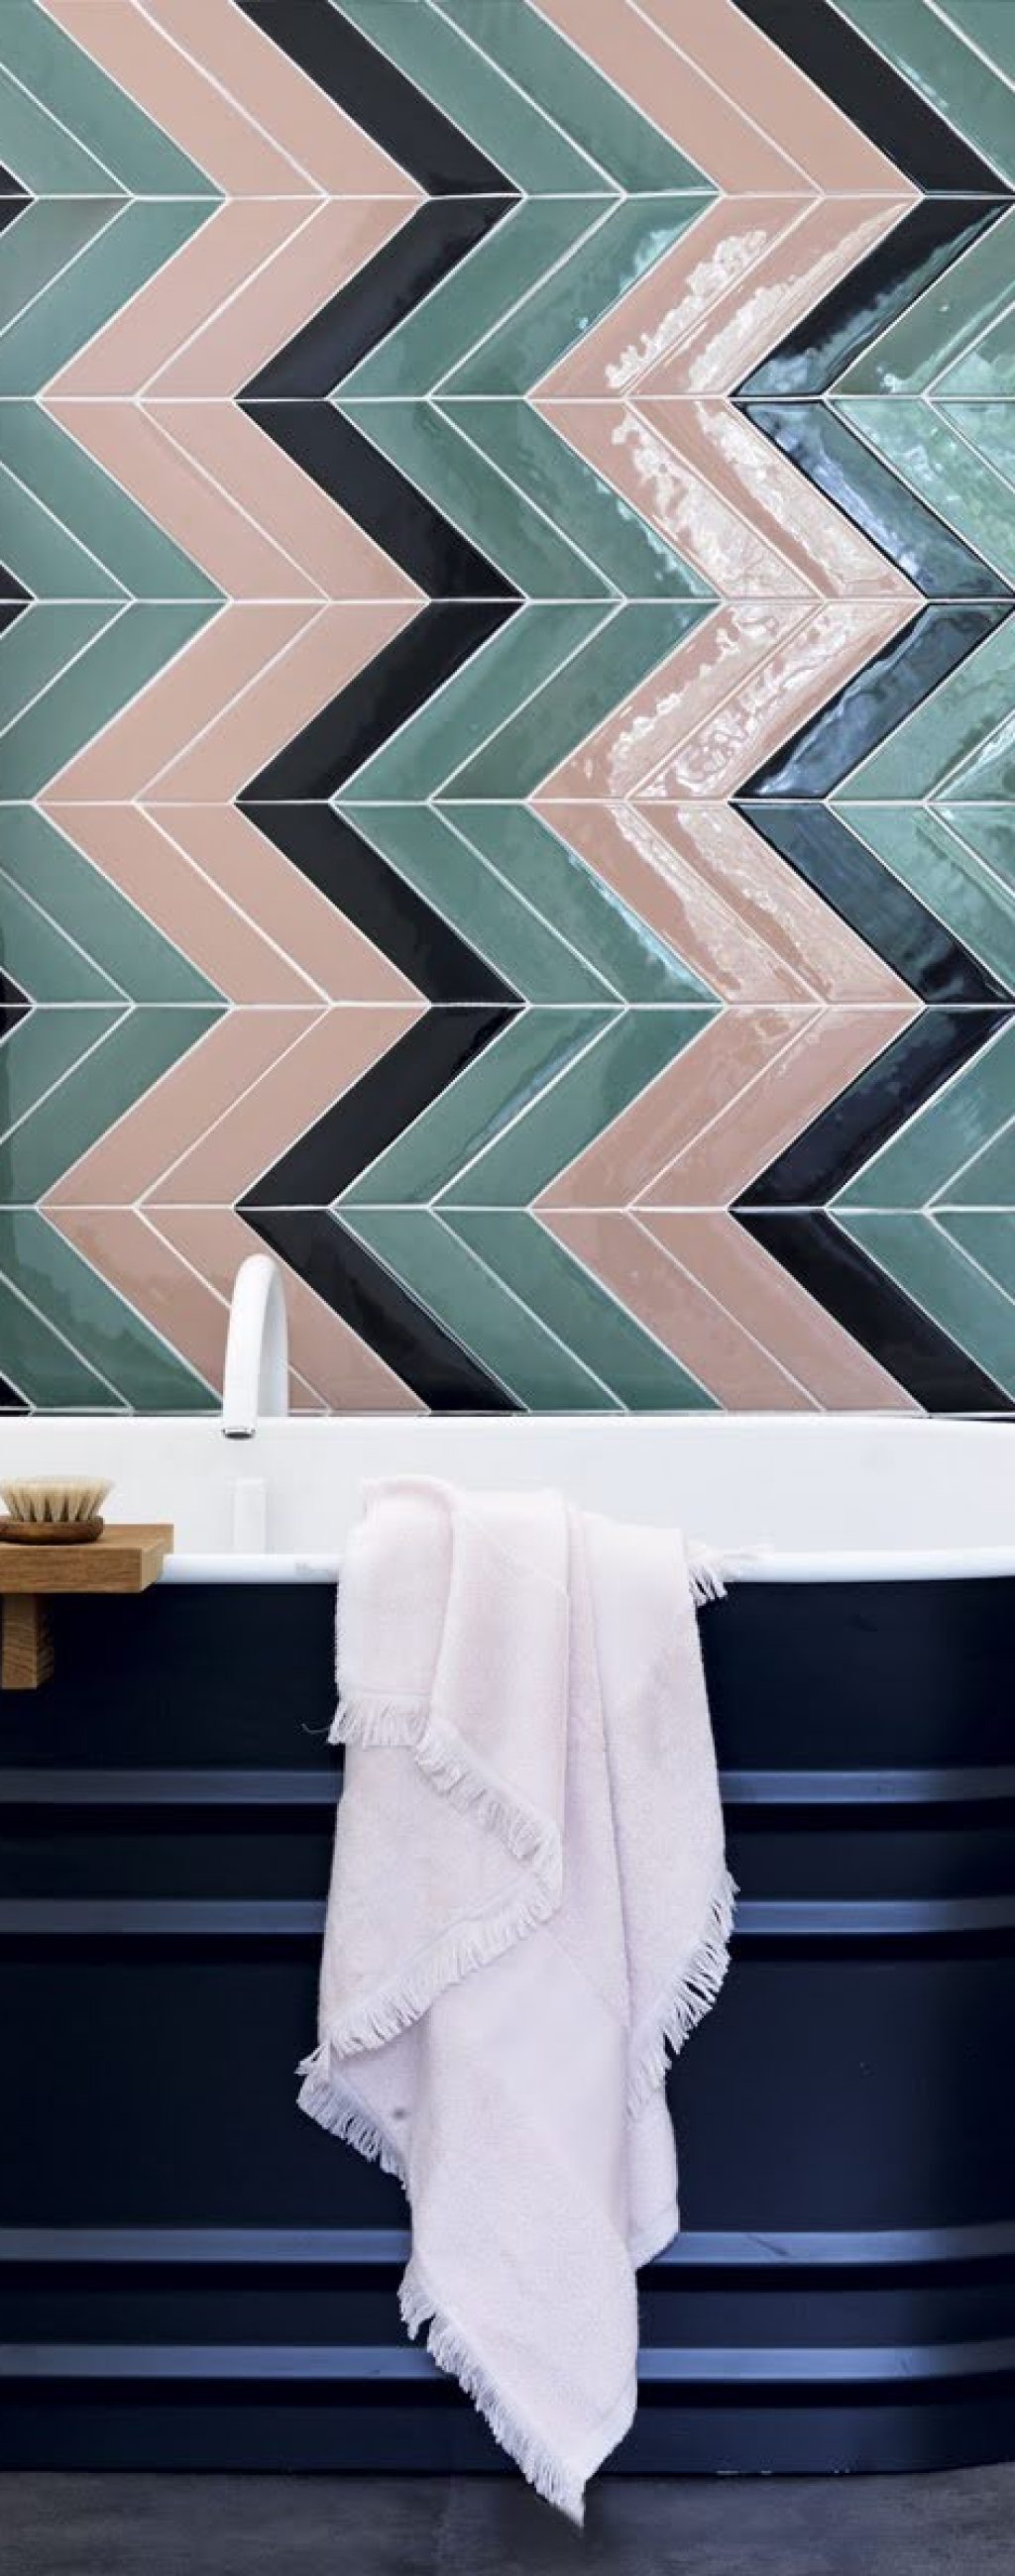 Bathroom tiles in pink and green in a chevron design